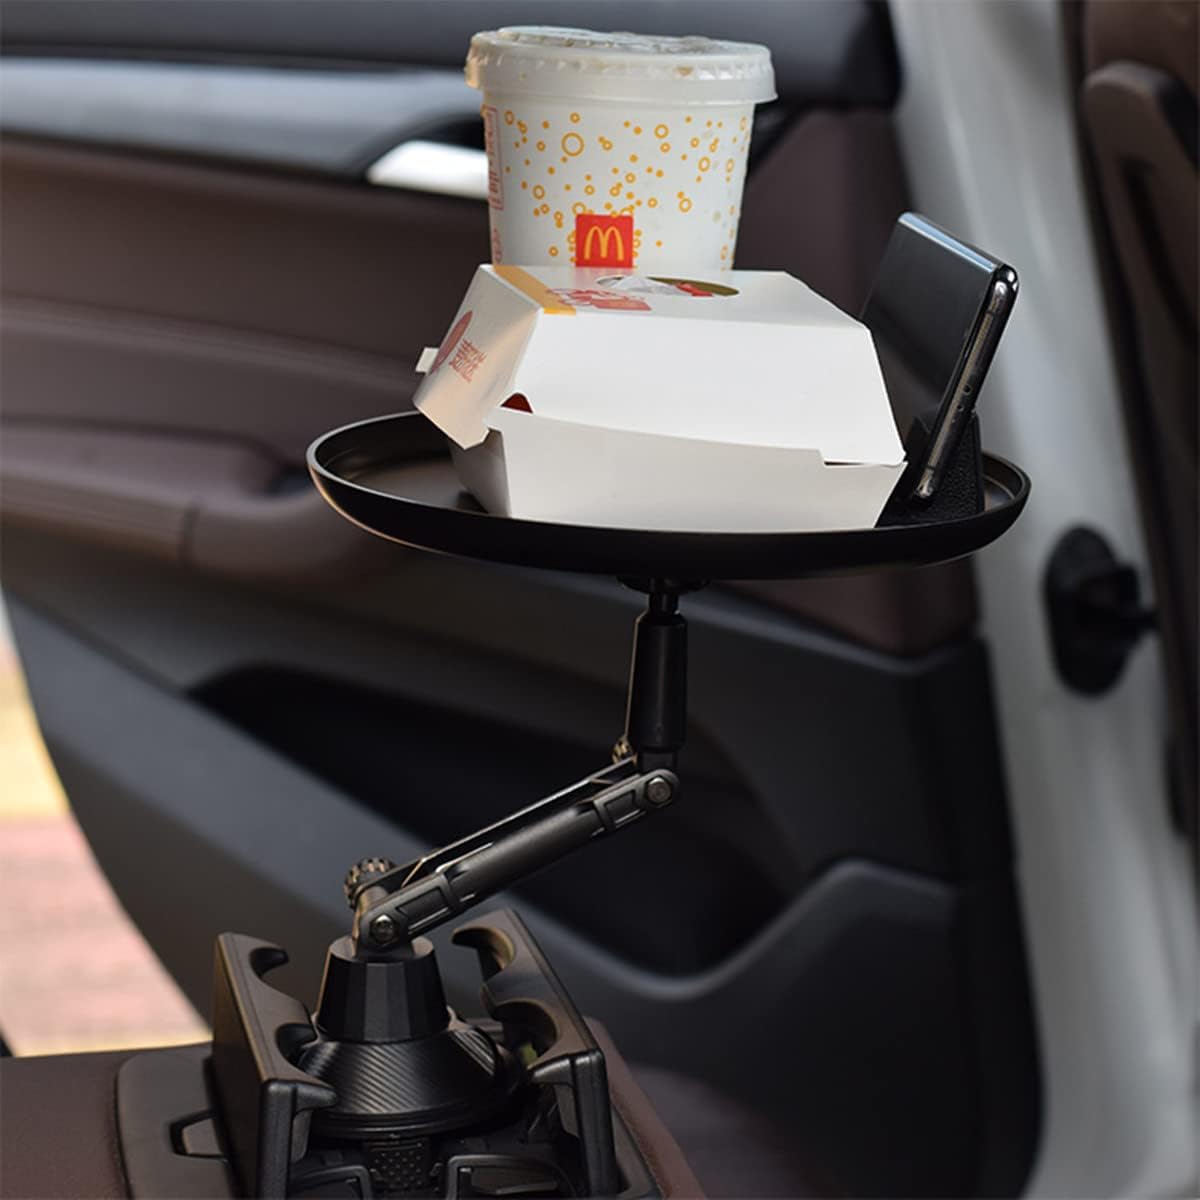 Car Cup Holder: A Convenient Beverage and Snack Tray